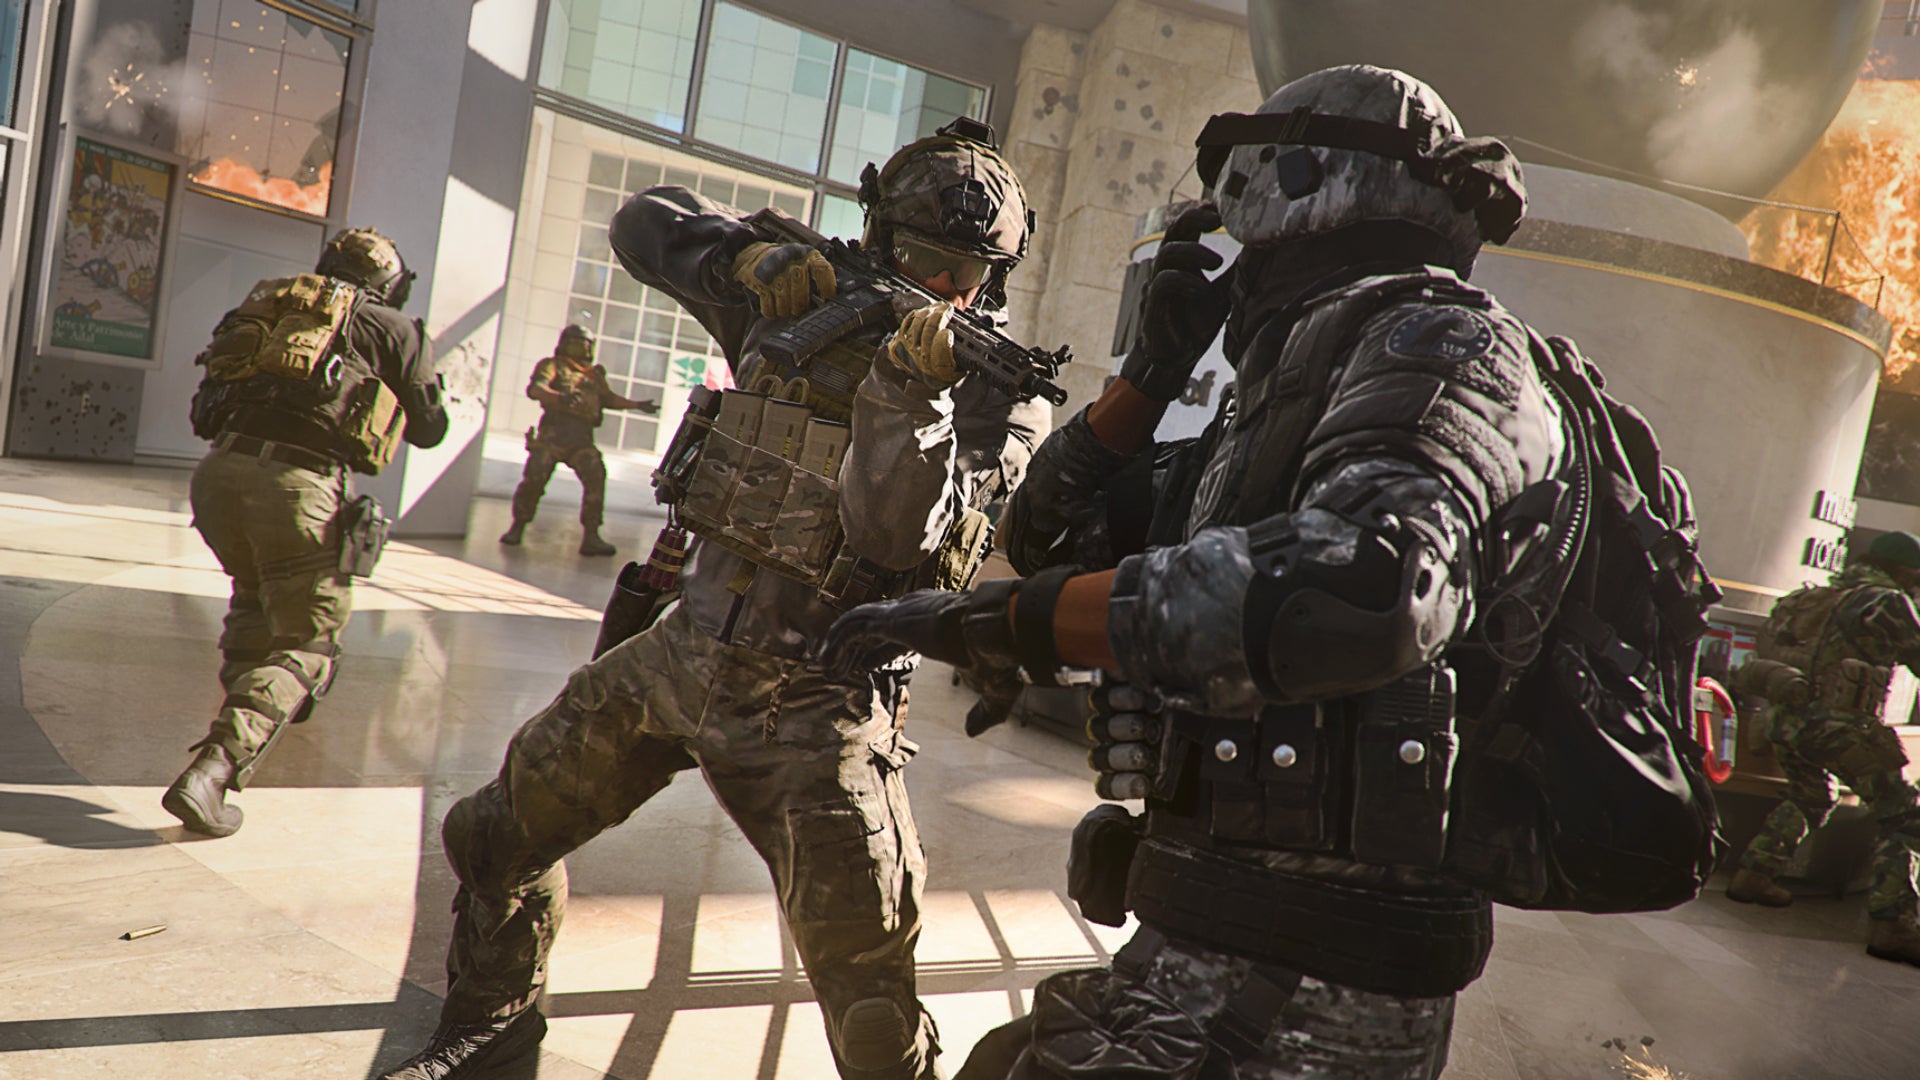 A soldier in Warzone 2.0 threatens an enemy with their rifle while their squadmates secure the indoor area around them.